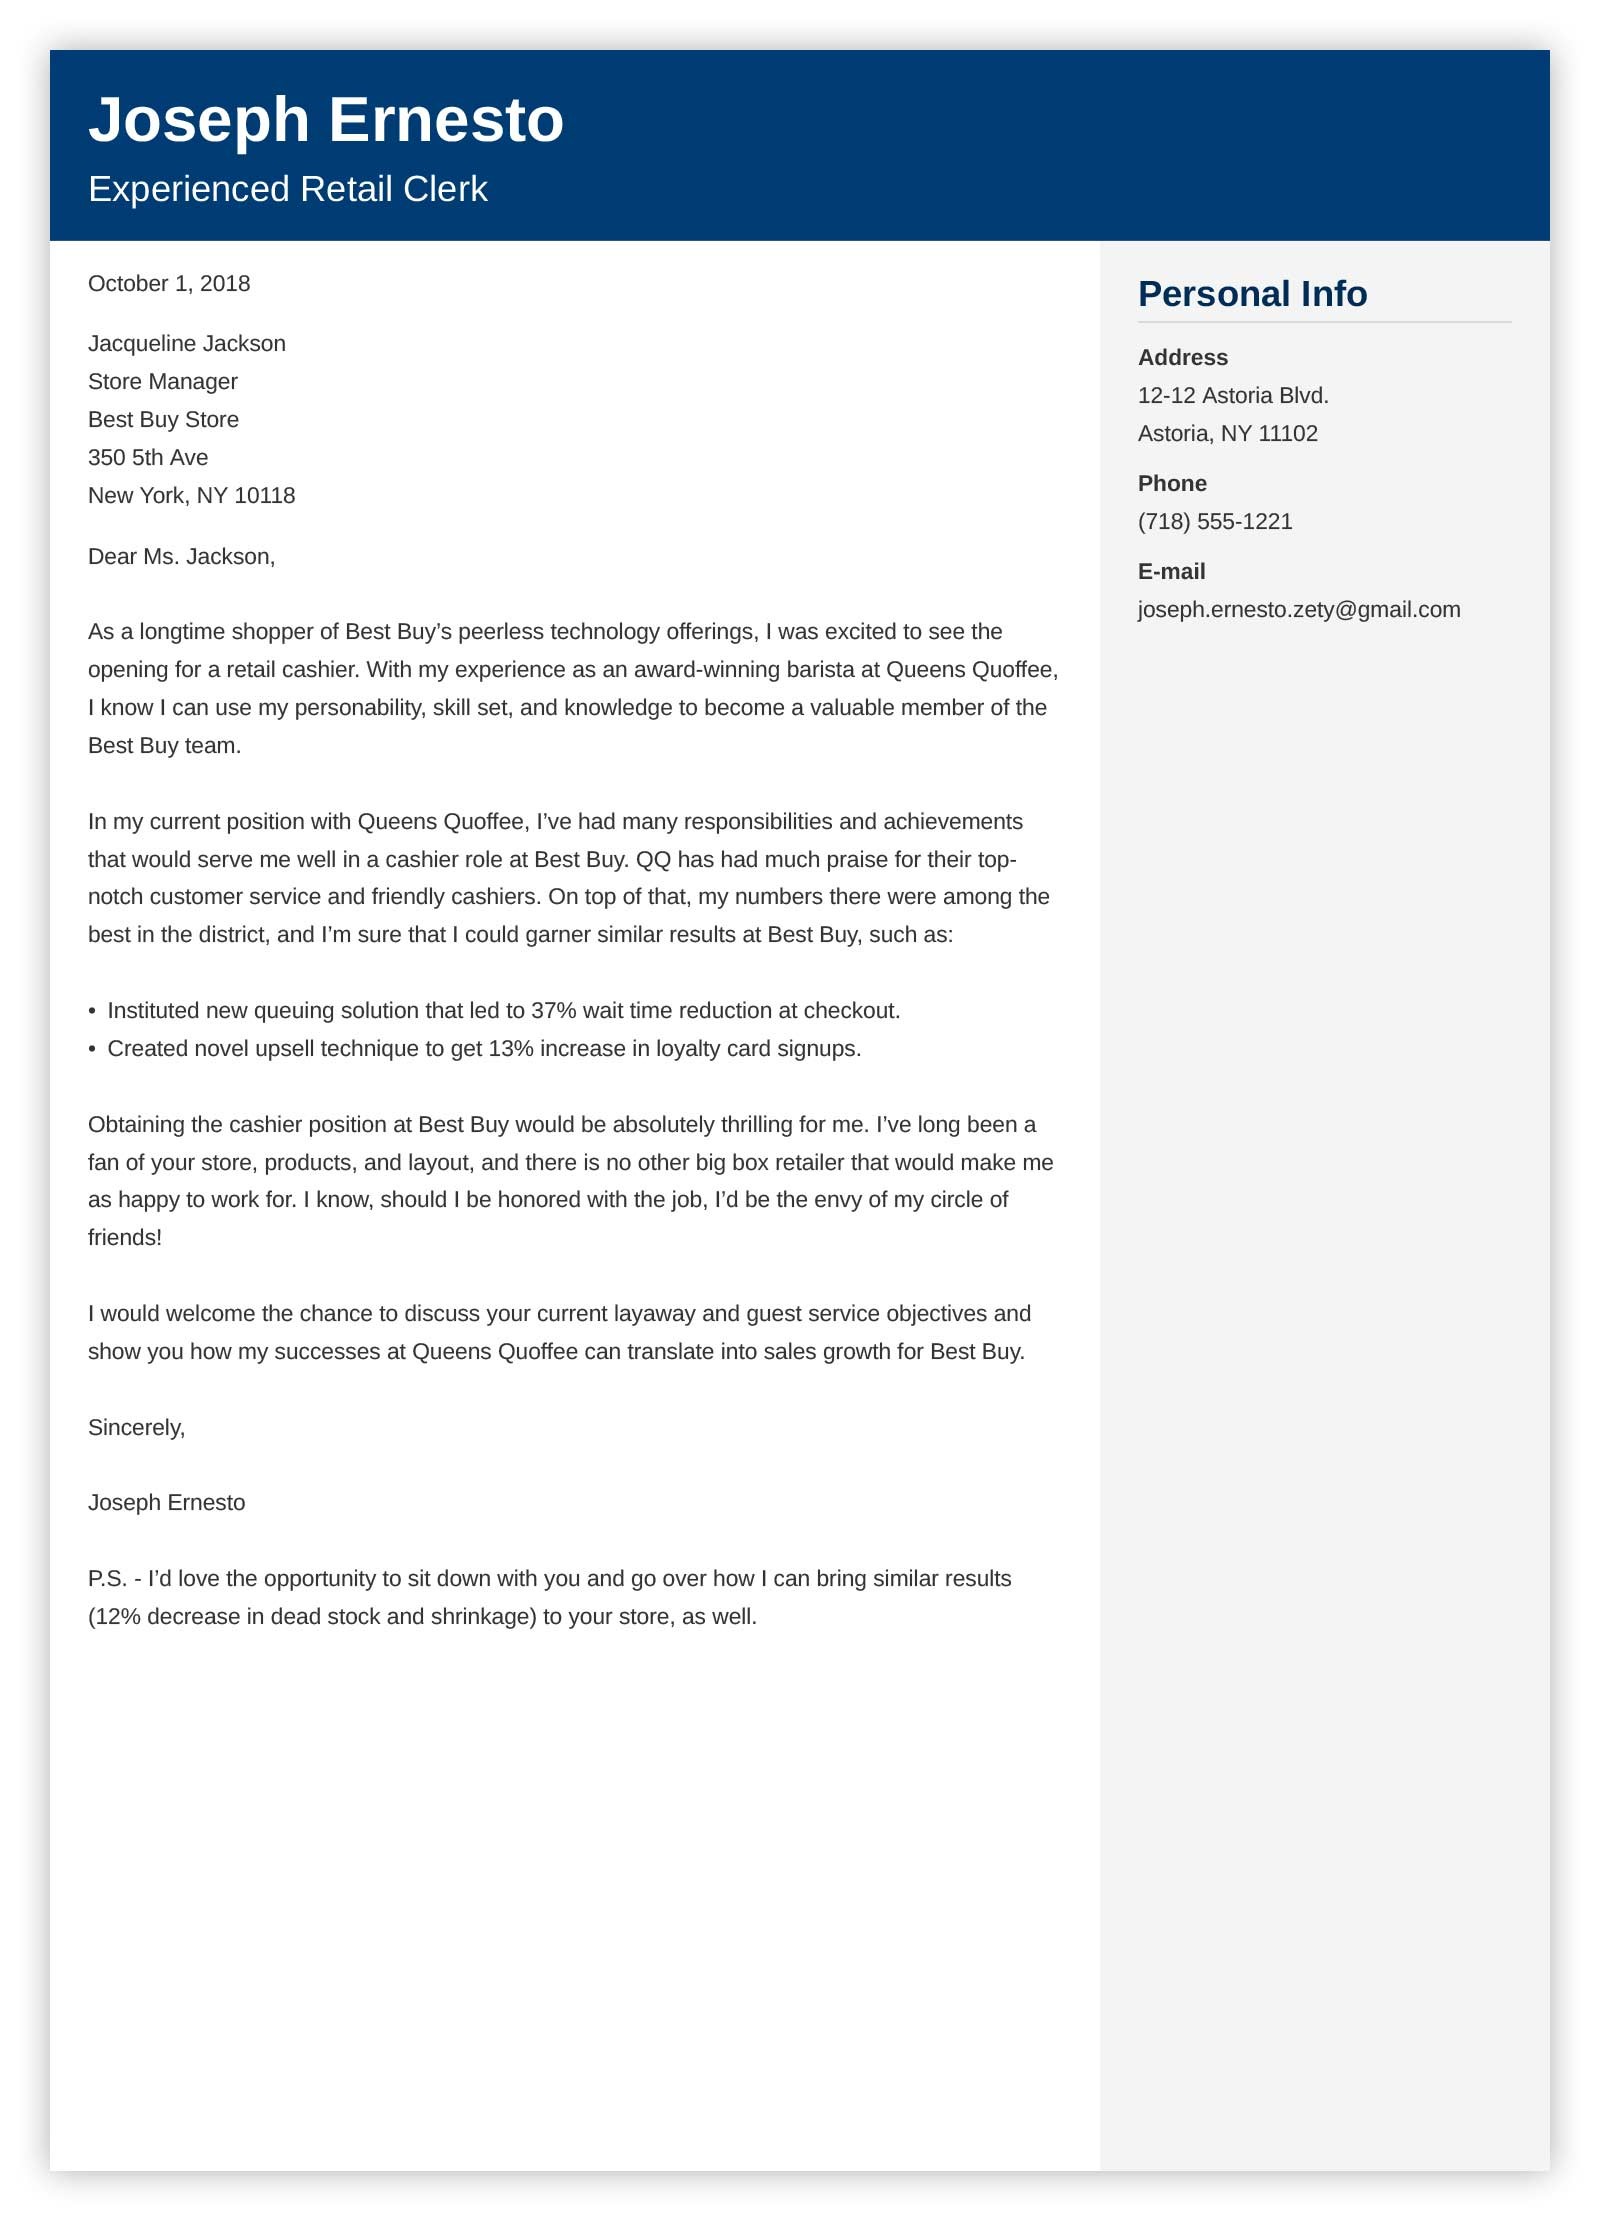 Cold Cover Letter Examples from cdn-images.zety.com